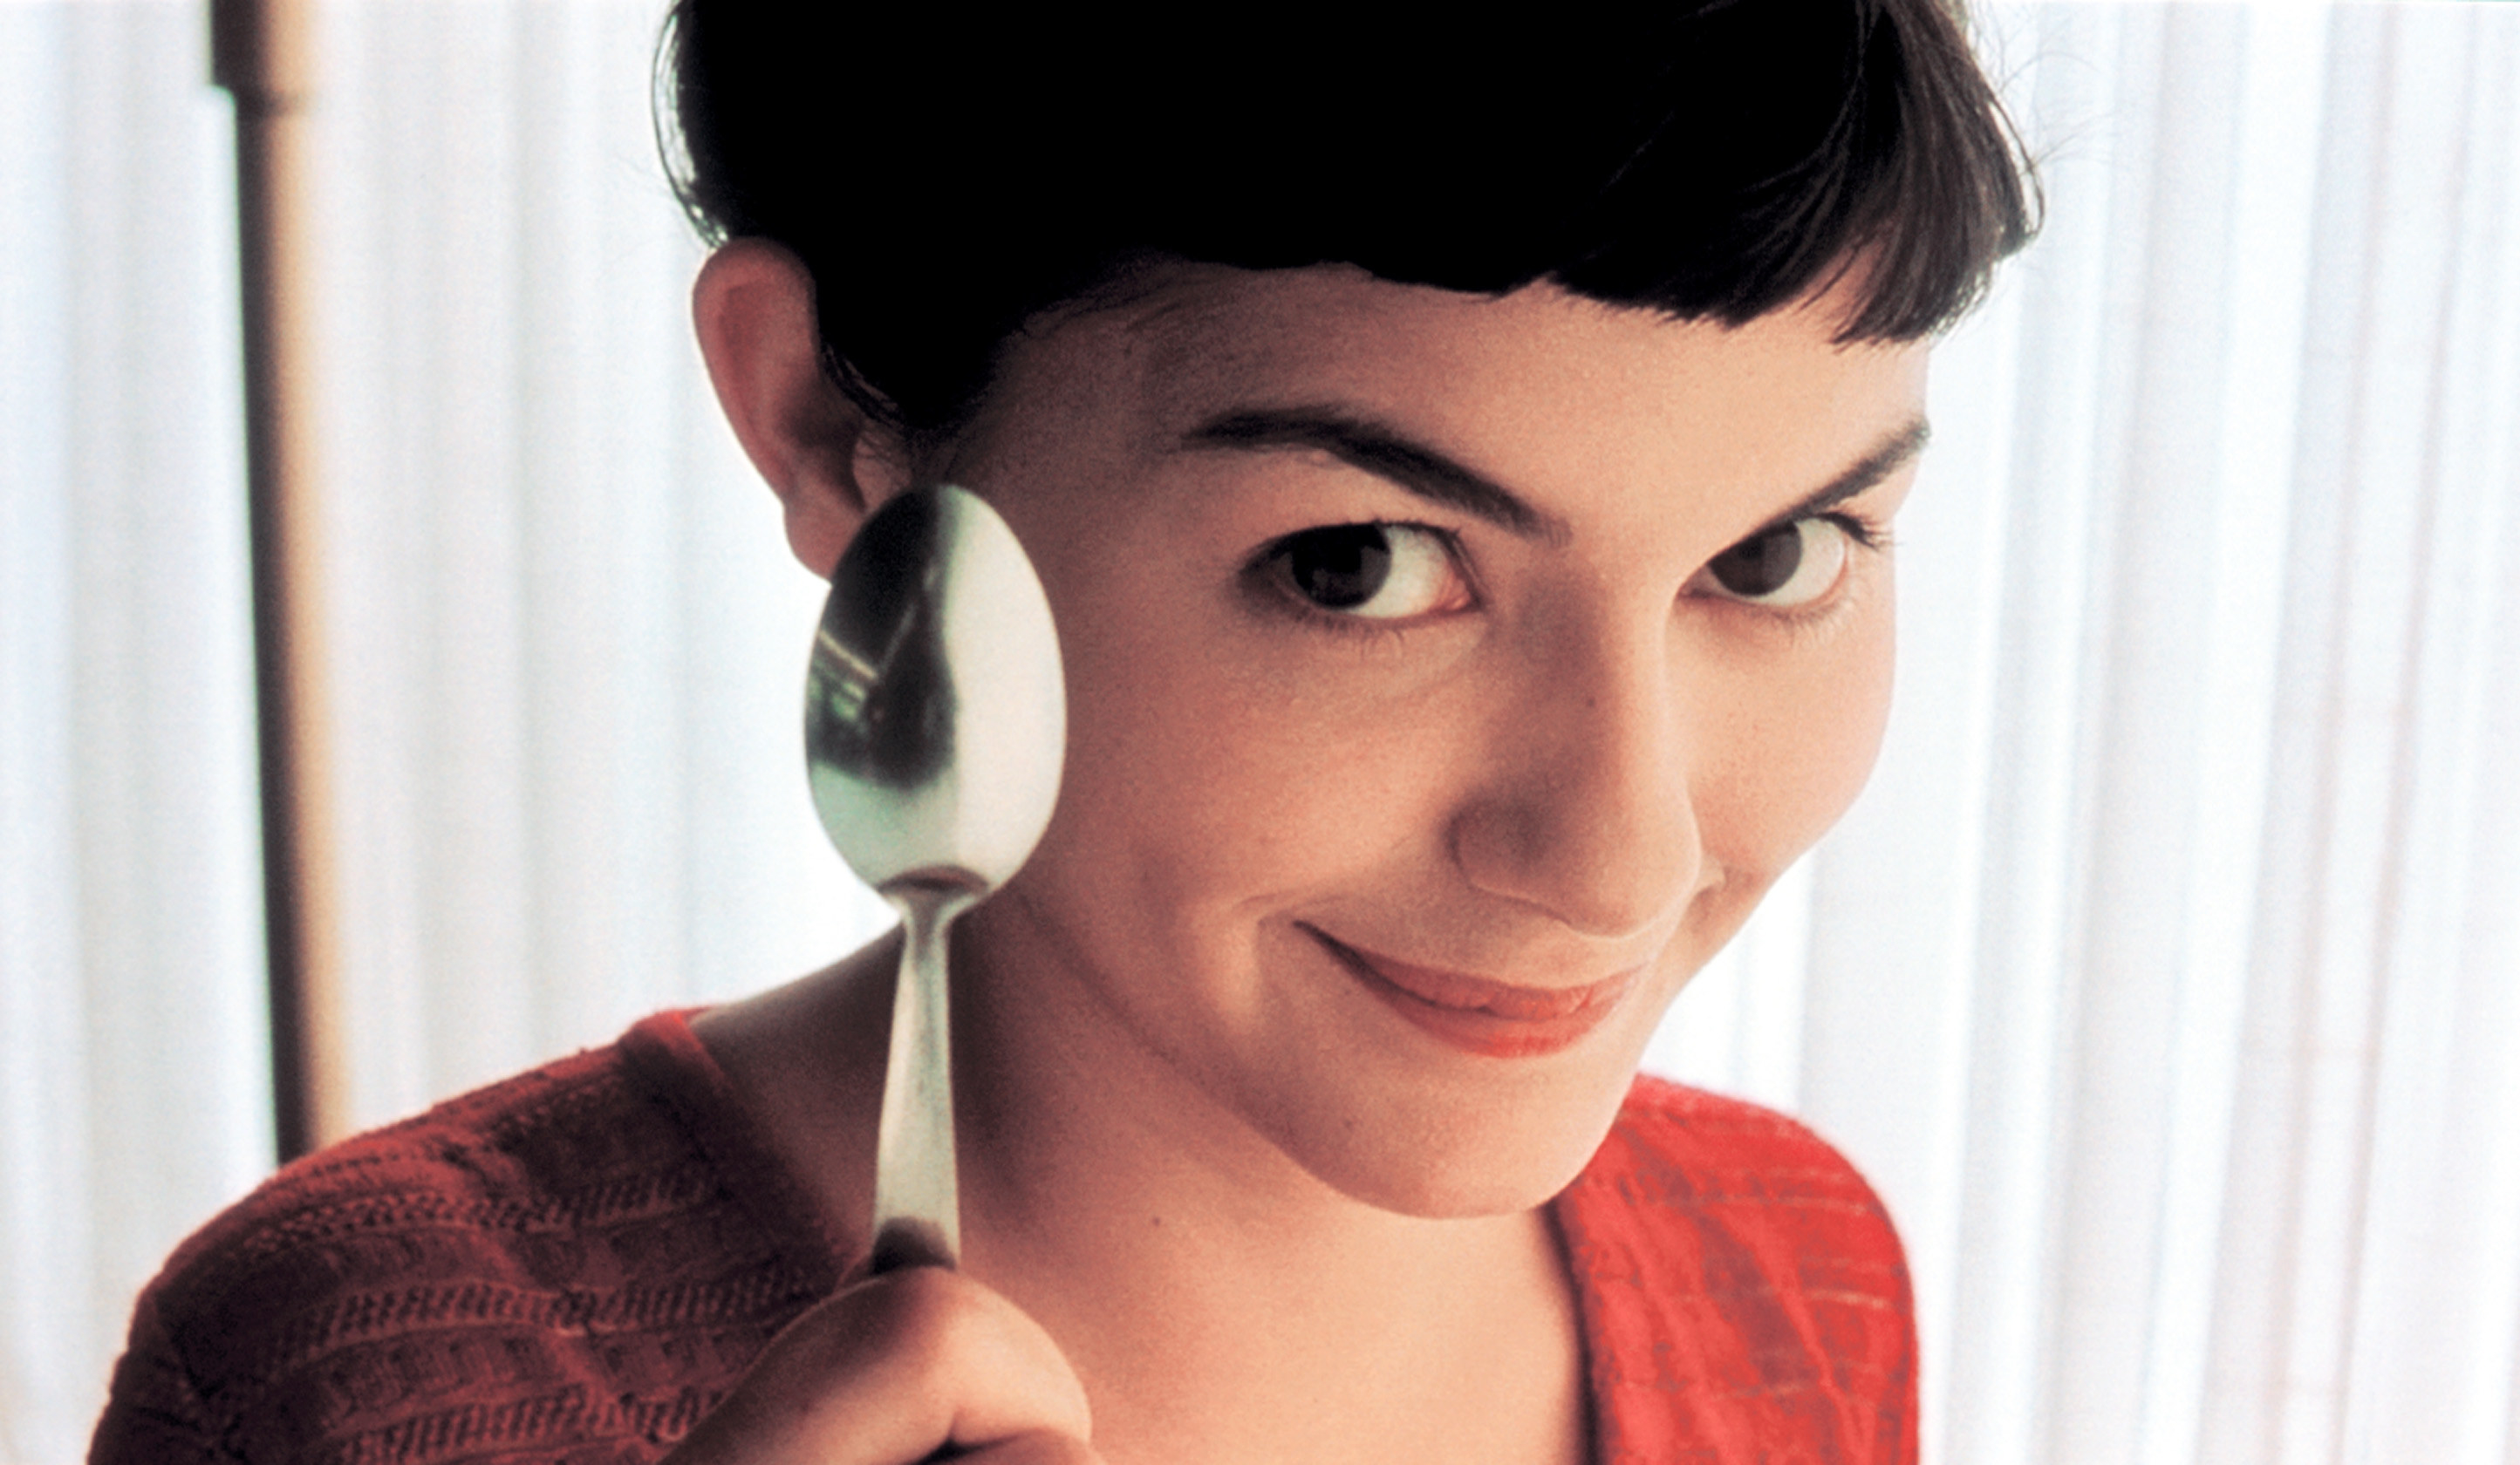 Audrey Tatou holds a spoon and looks mischievously at the camera